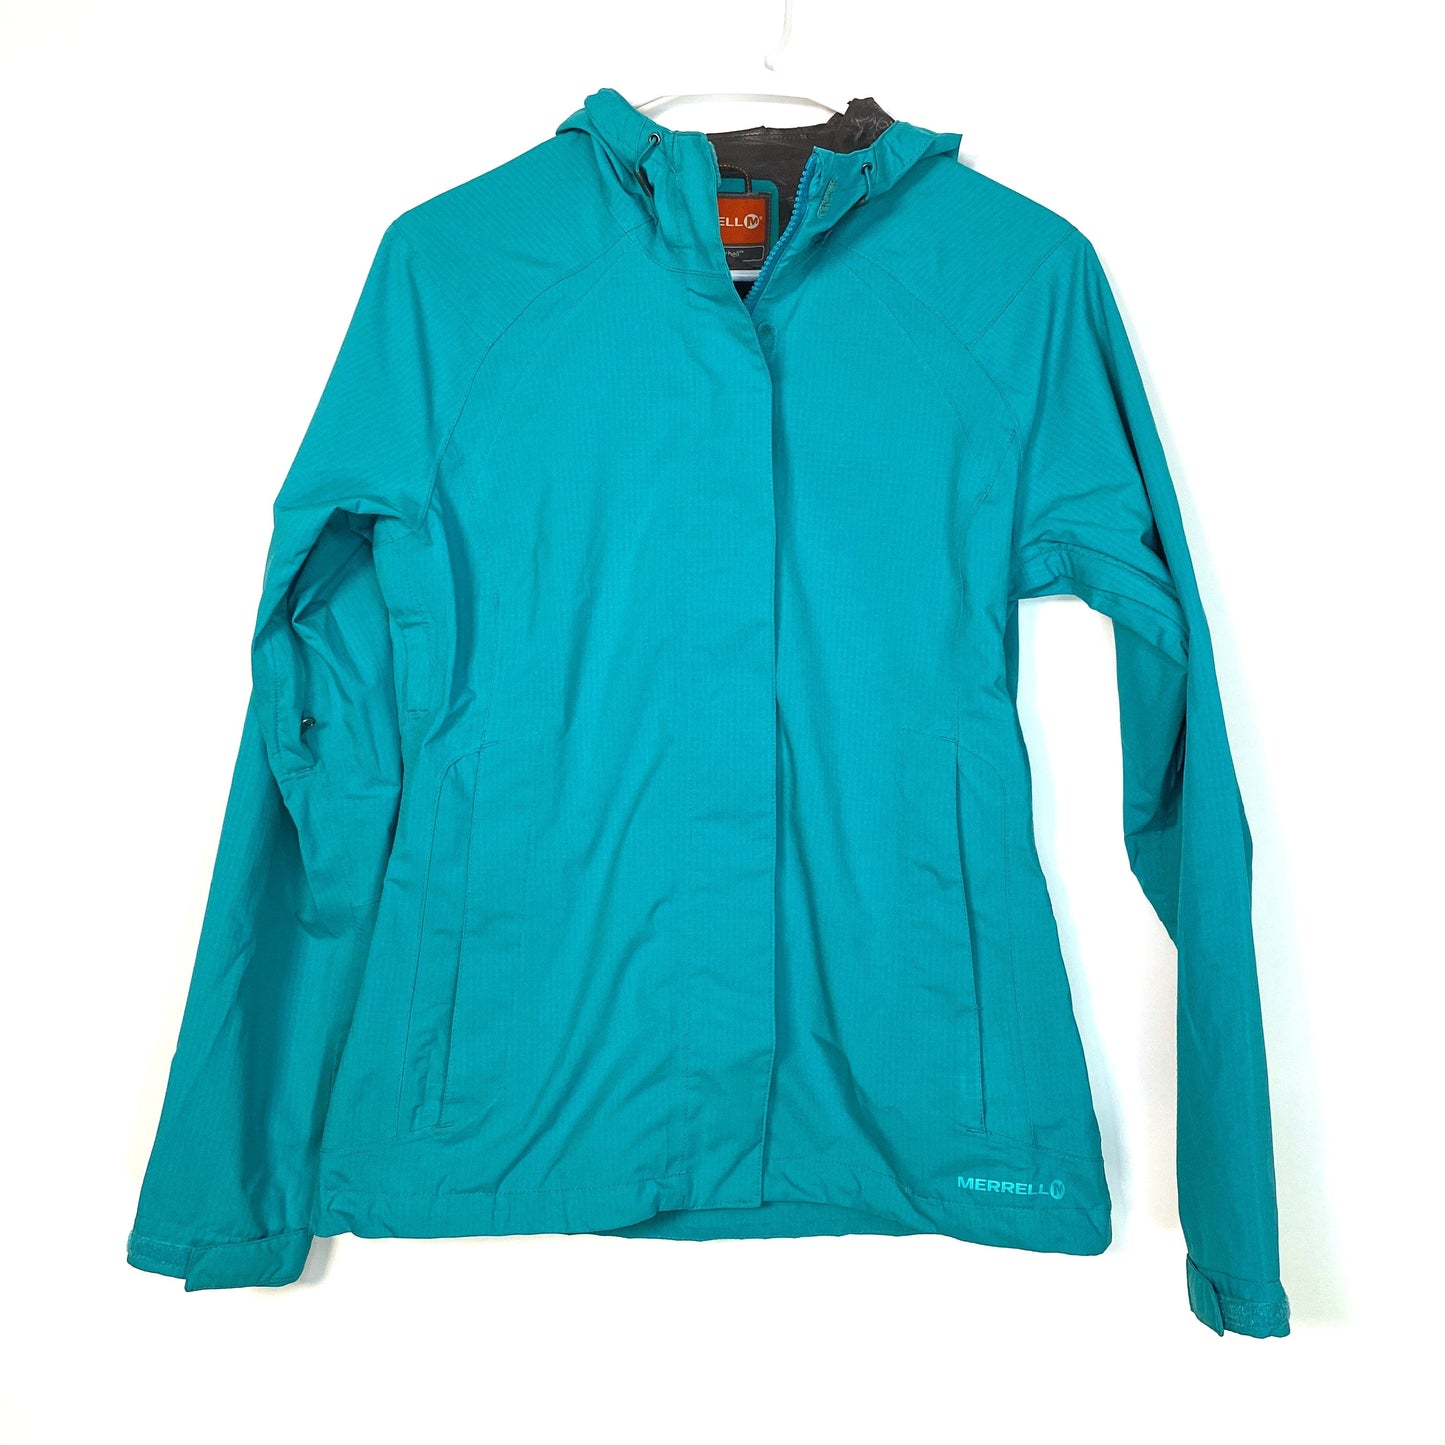 MERRELL Womens Size S Teal Blue Opti-Shell Zip-Up Hooded Jacket L/s